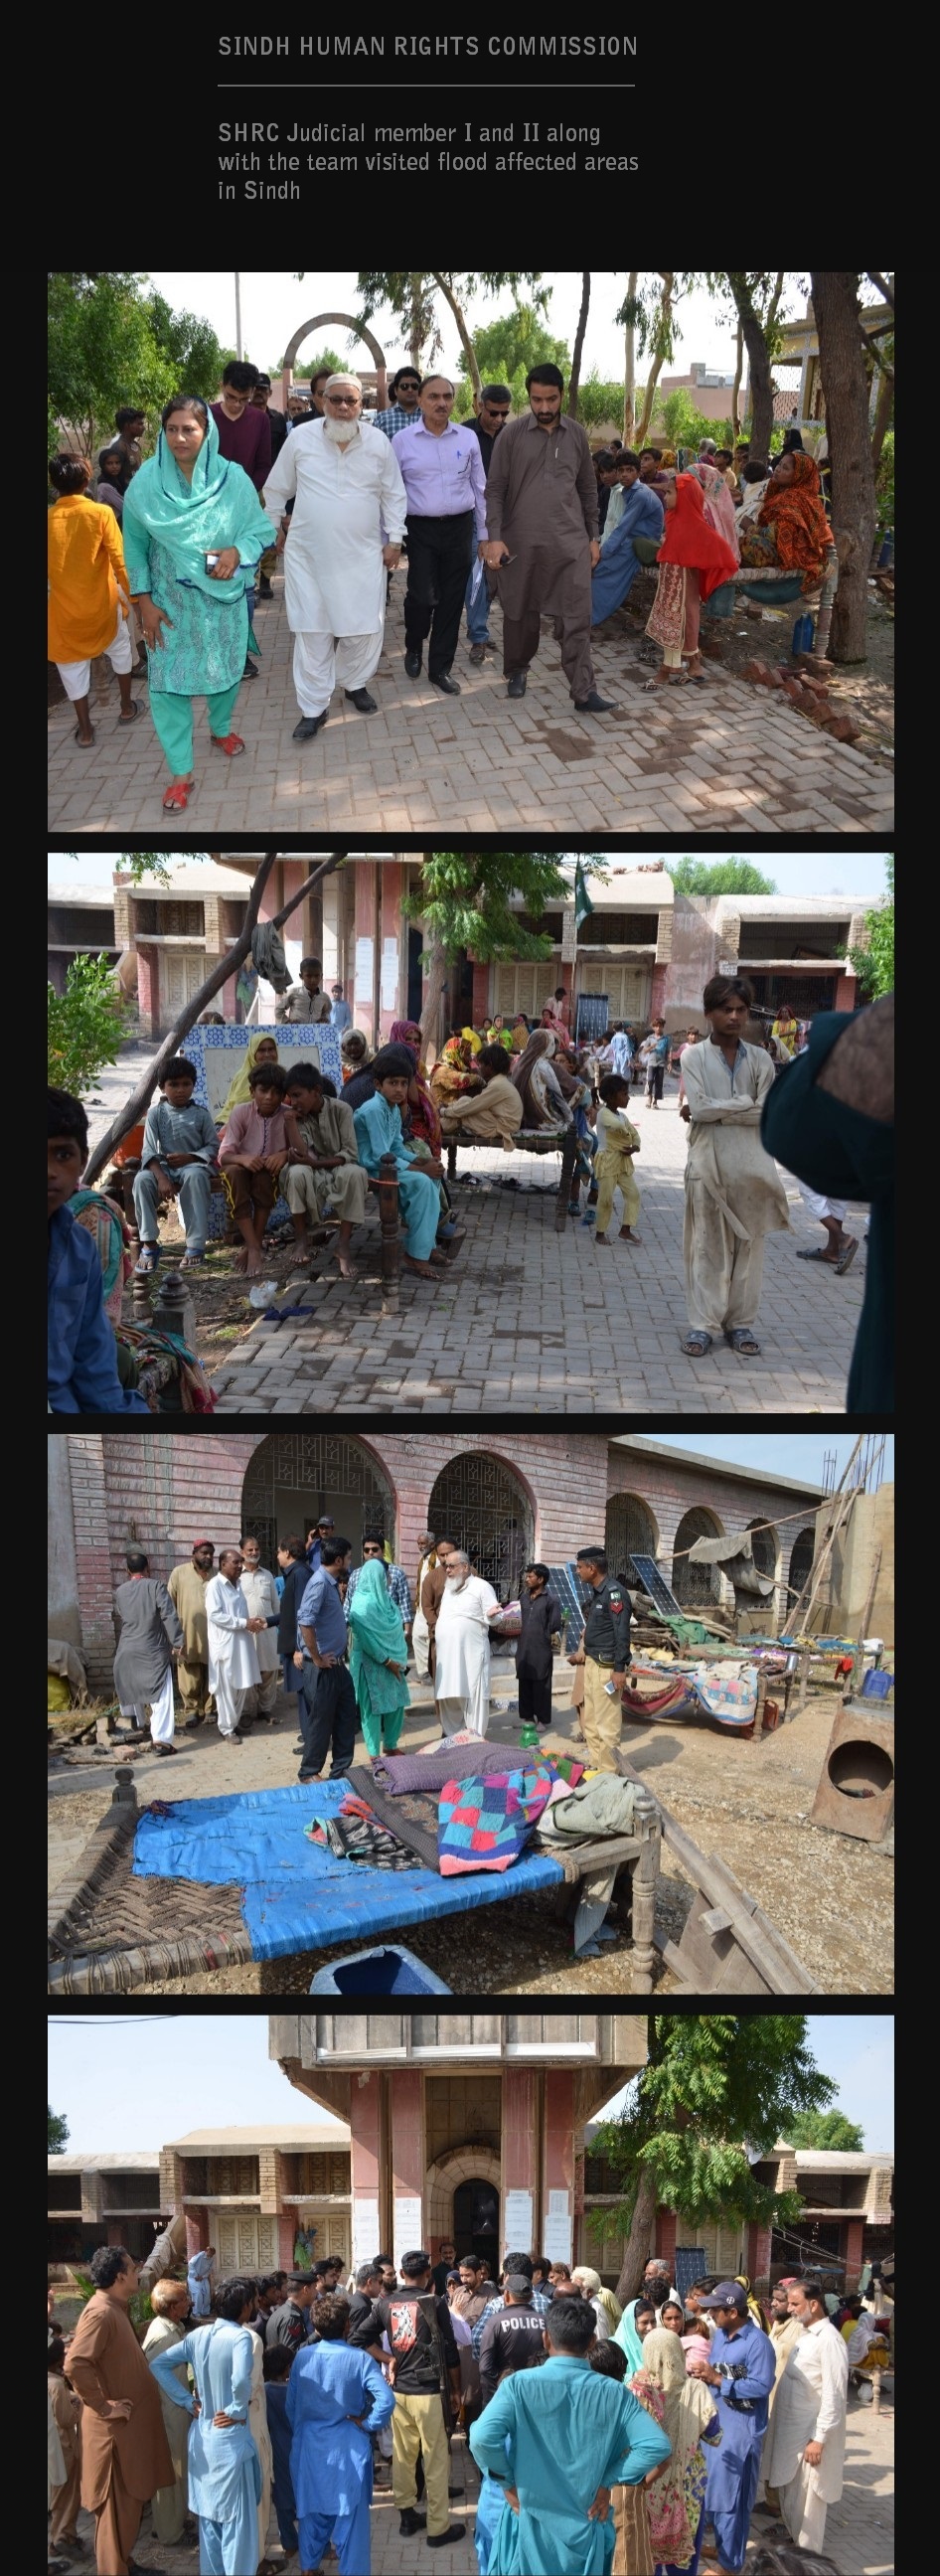 SHRC Judicial member I and II along with the team visited flood affected areas in Hyderabad, Sindh.